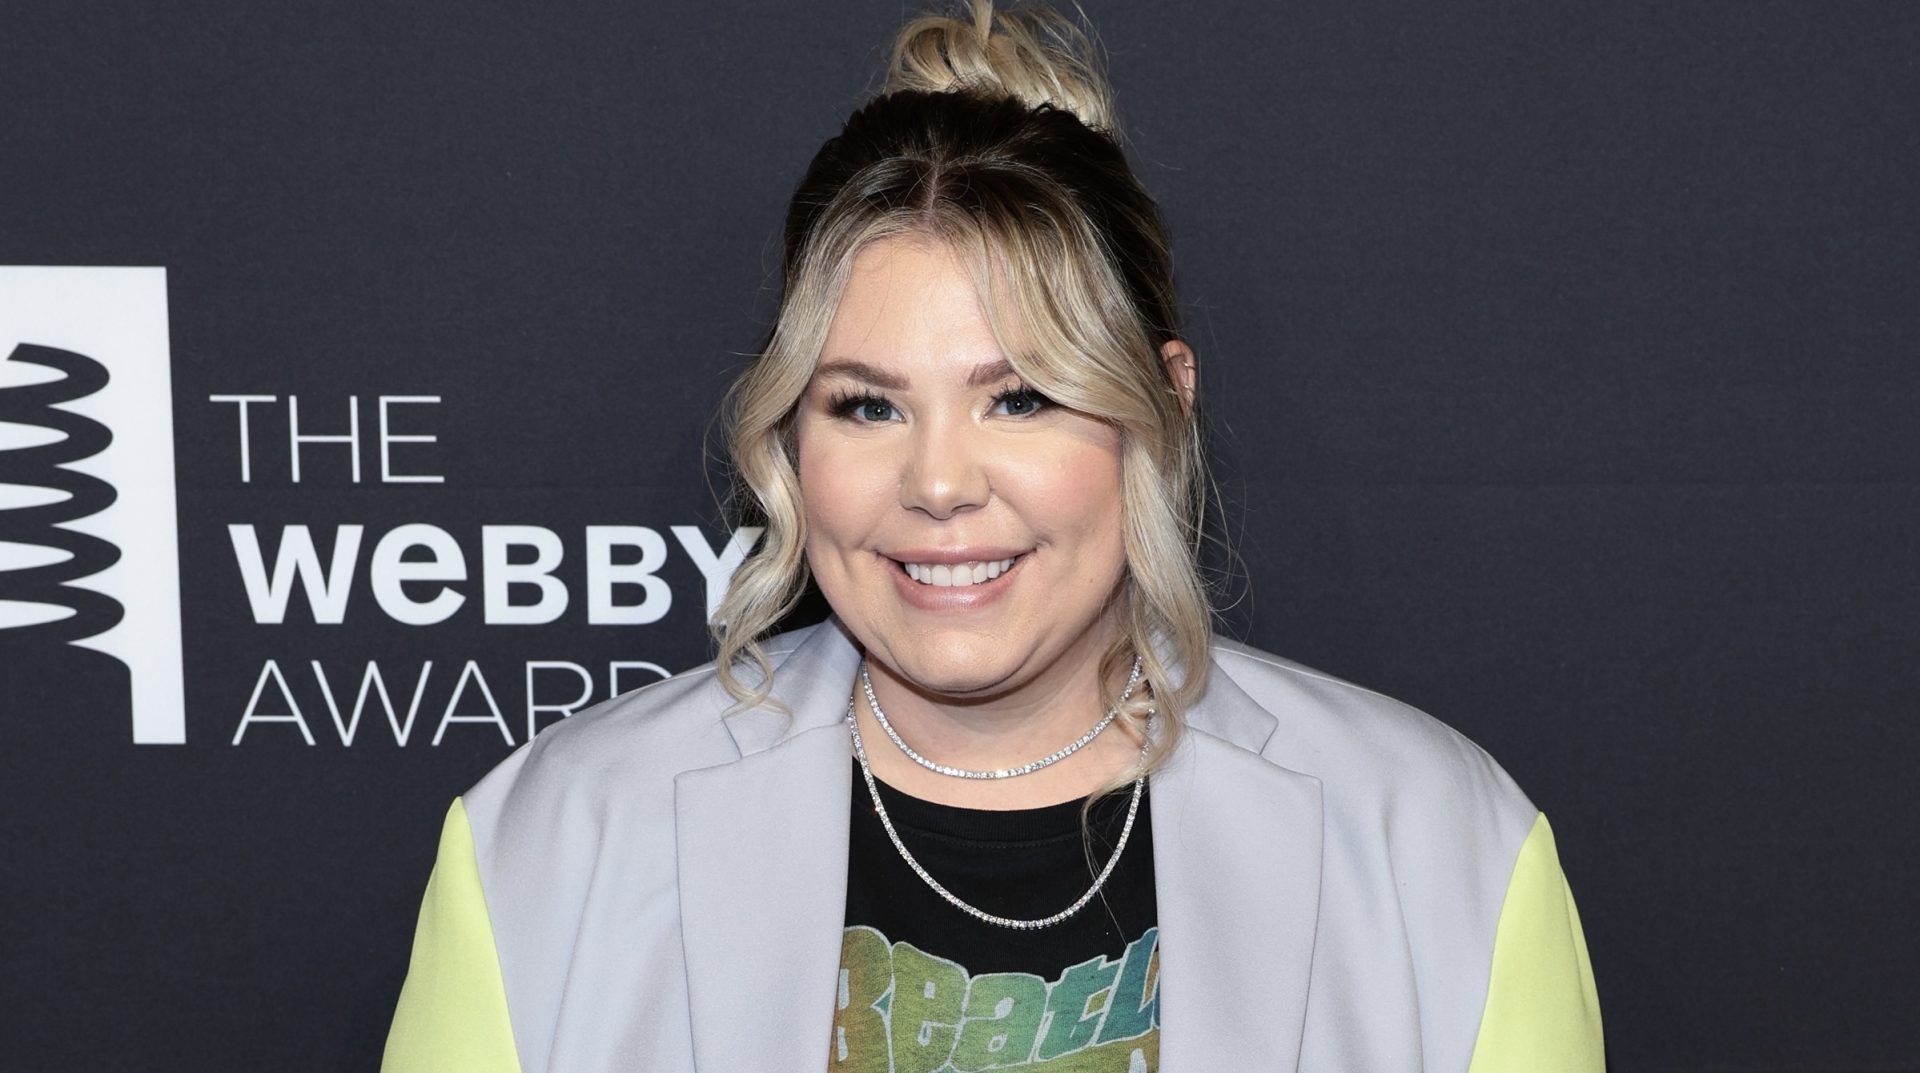 'Teen Mom 2' Star Kailyn Lowry Confirms She Had Fifth Child